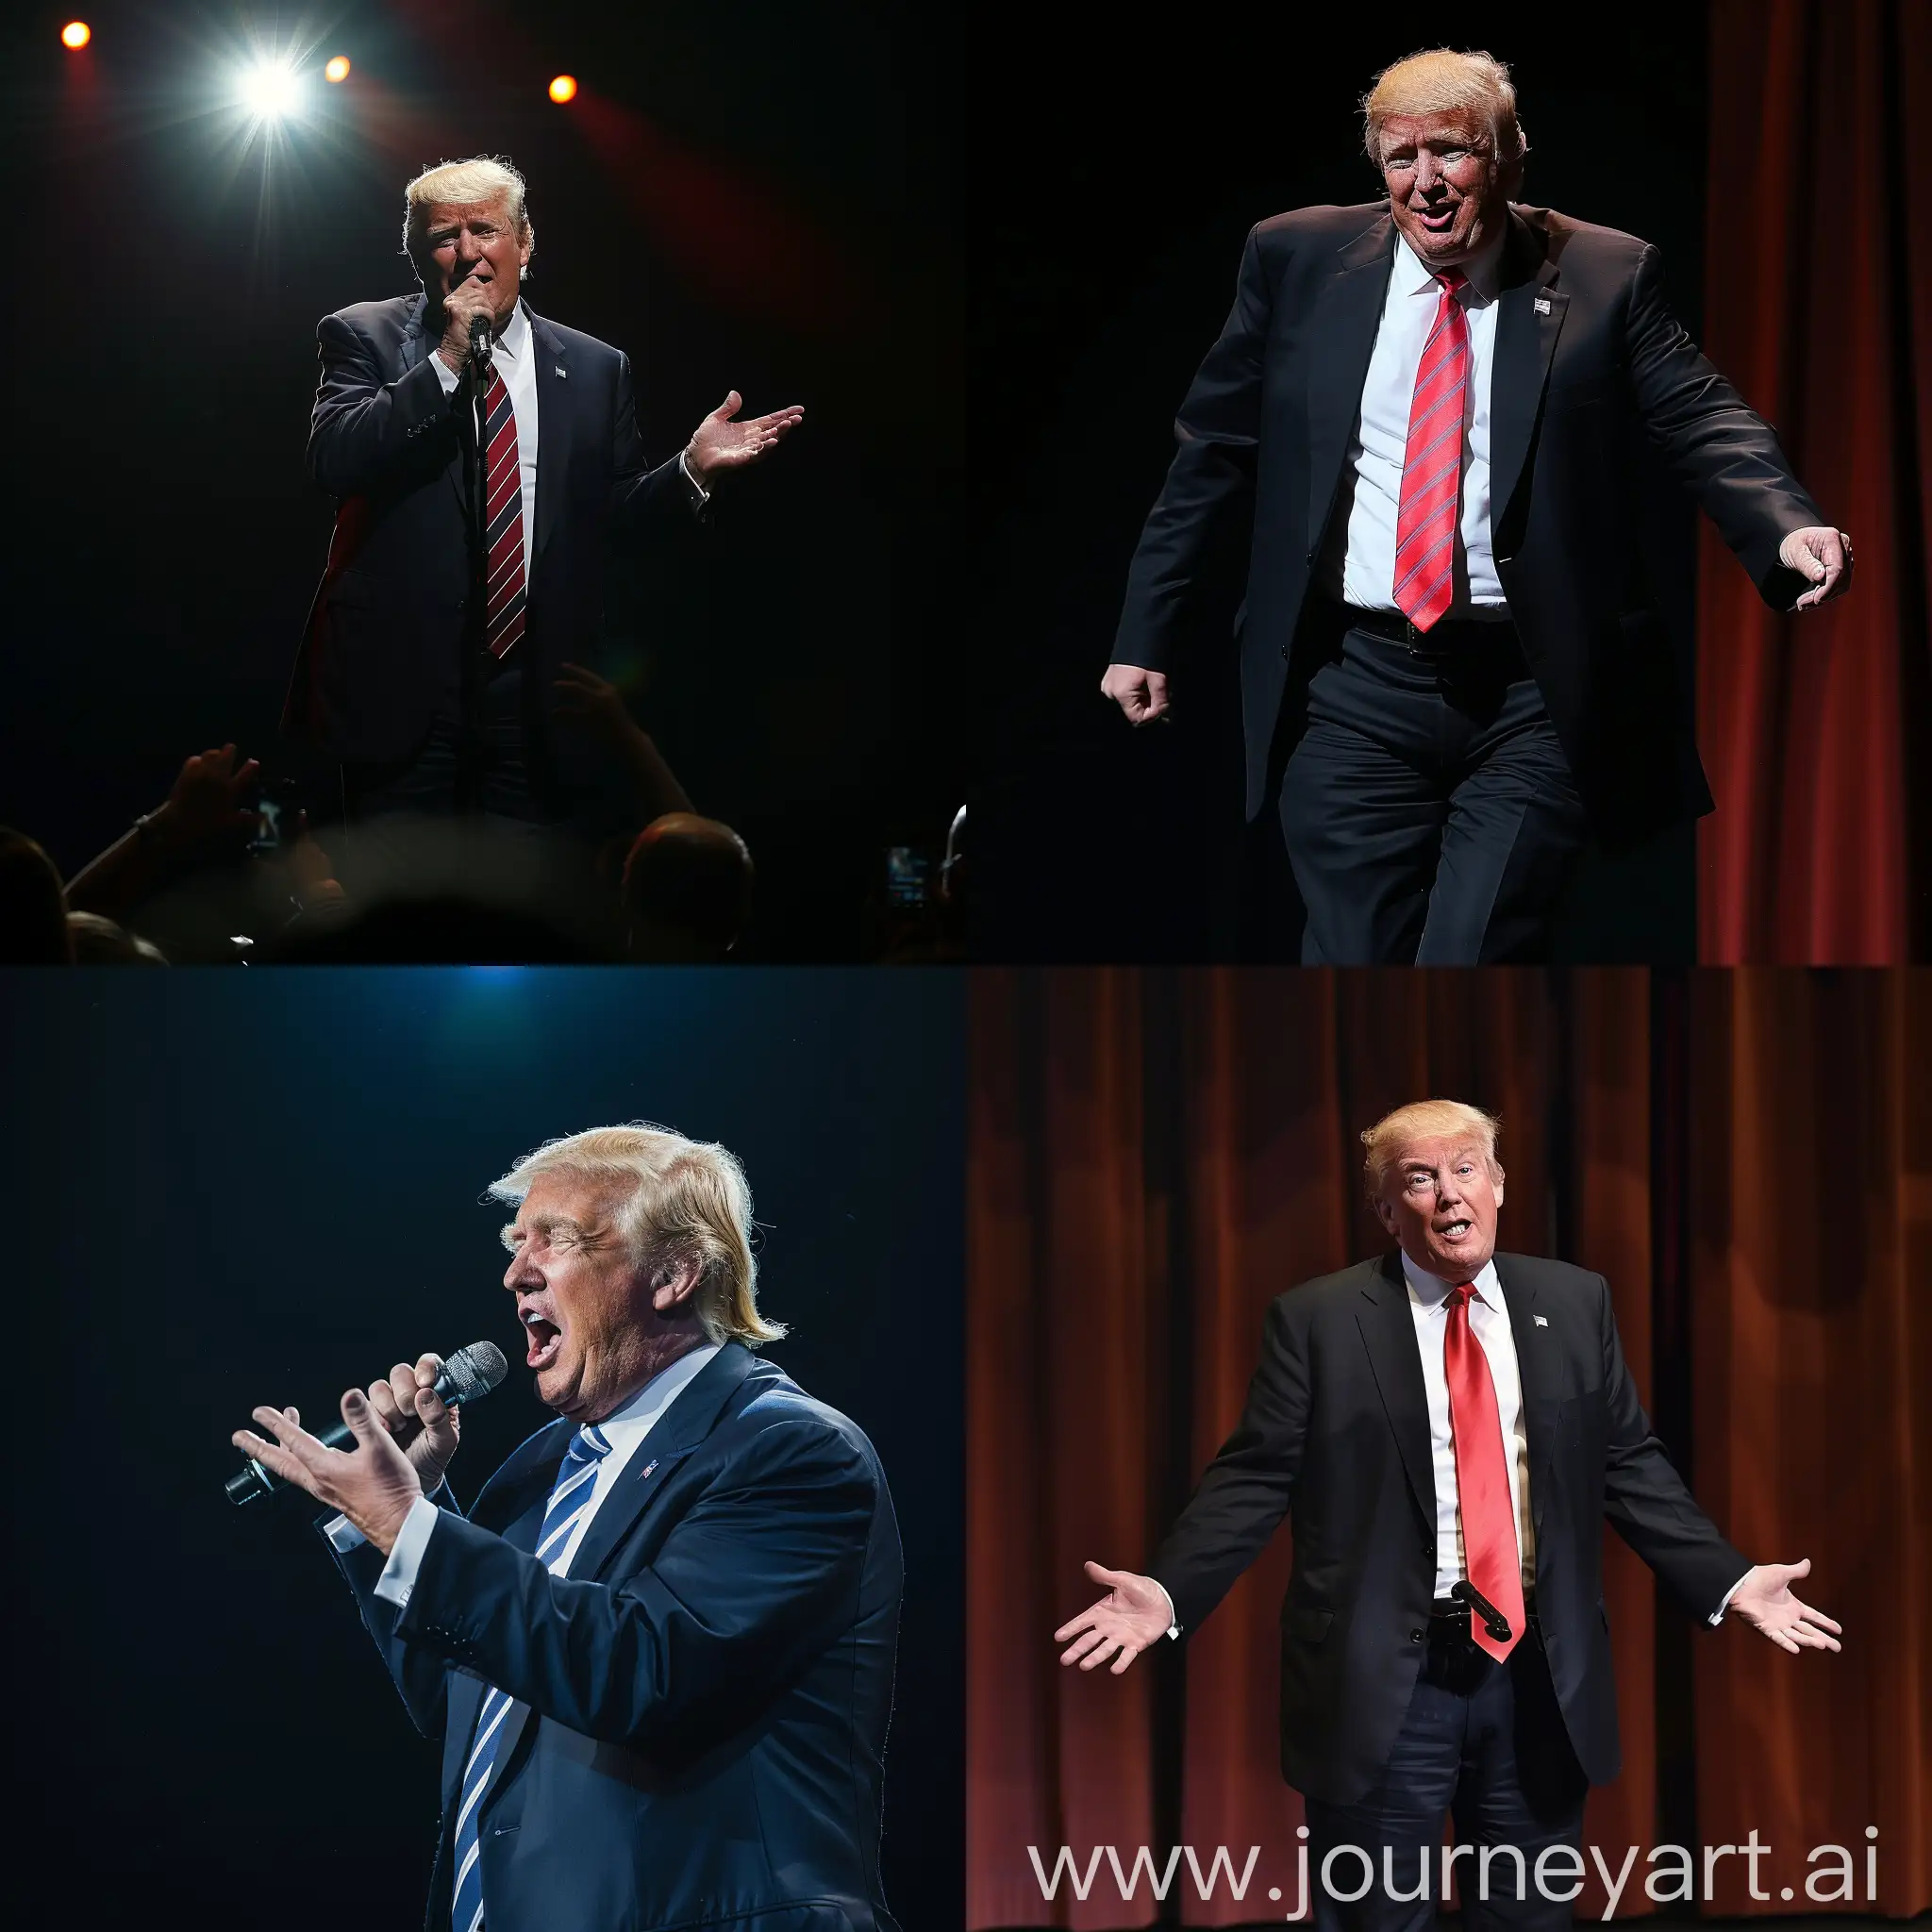 Donald-Trump-Commanding-the-Stage-in-Vibrant-Image